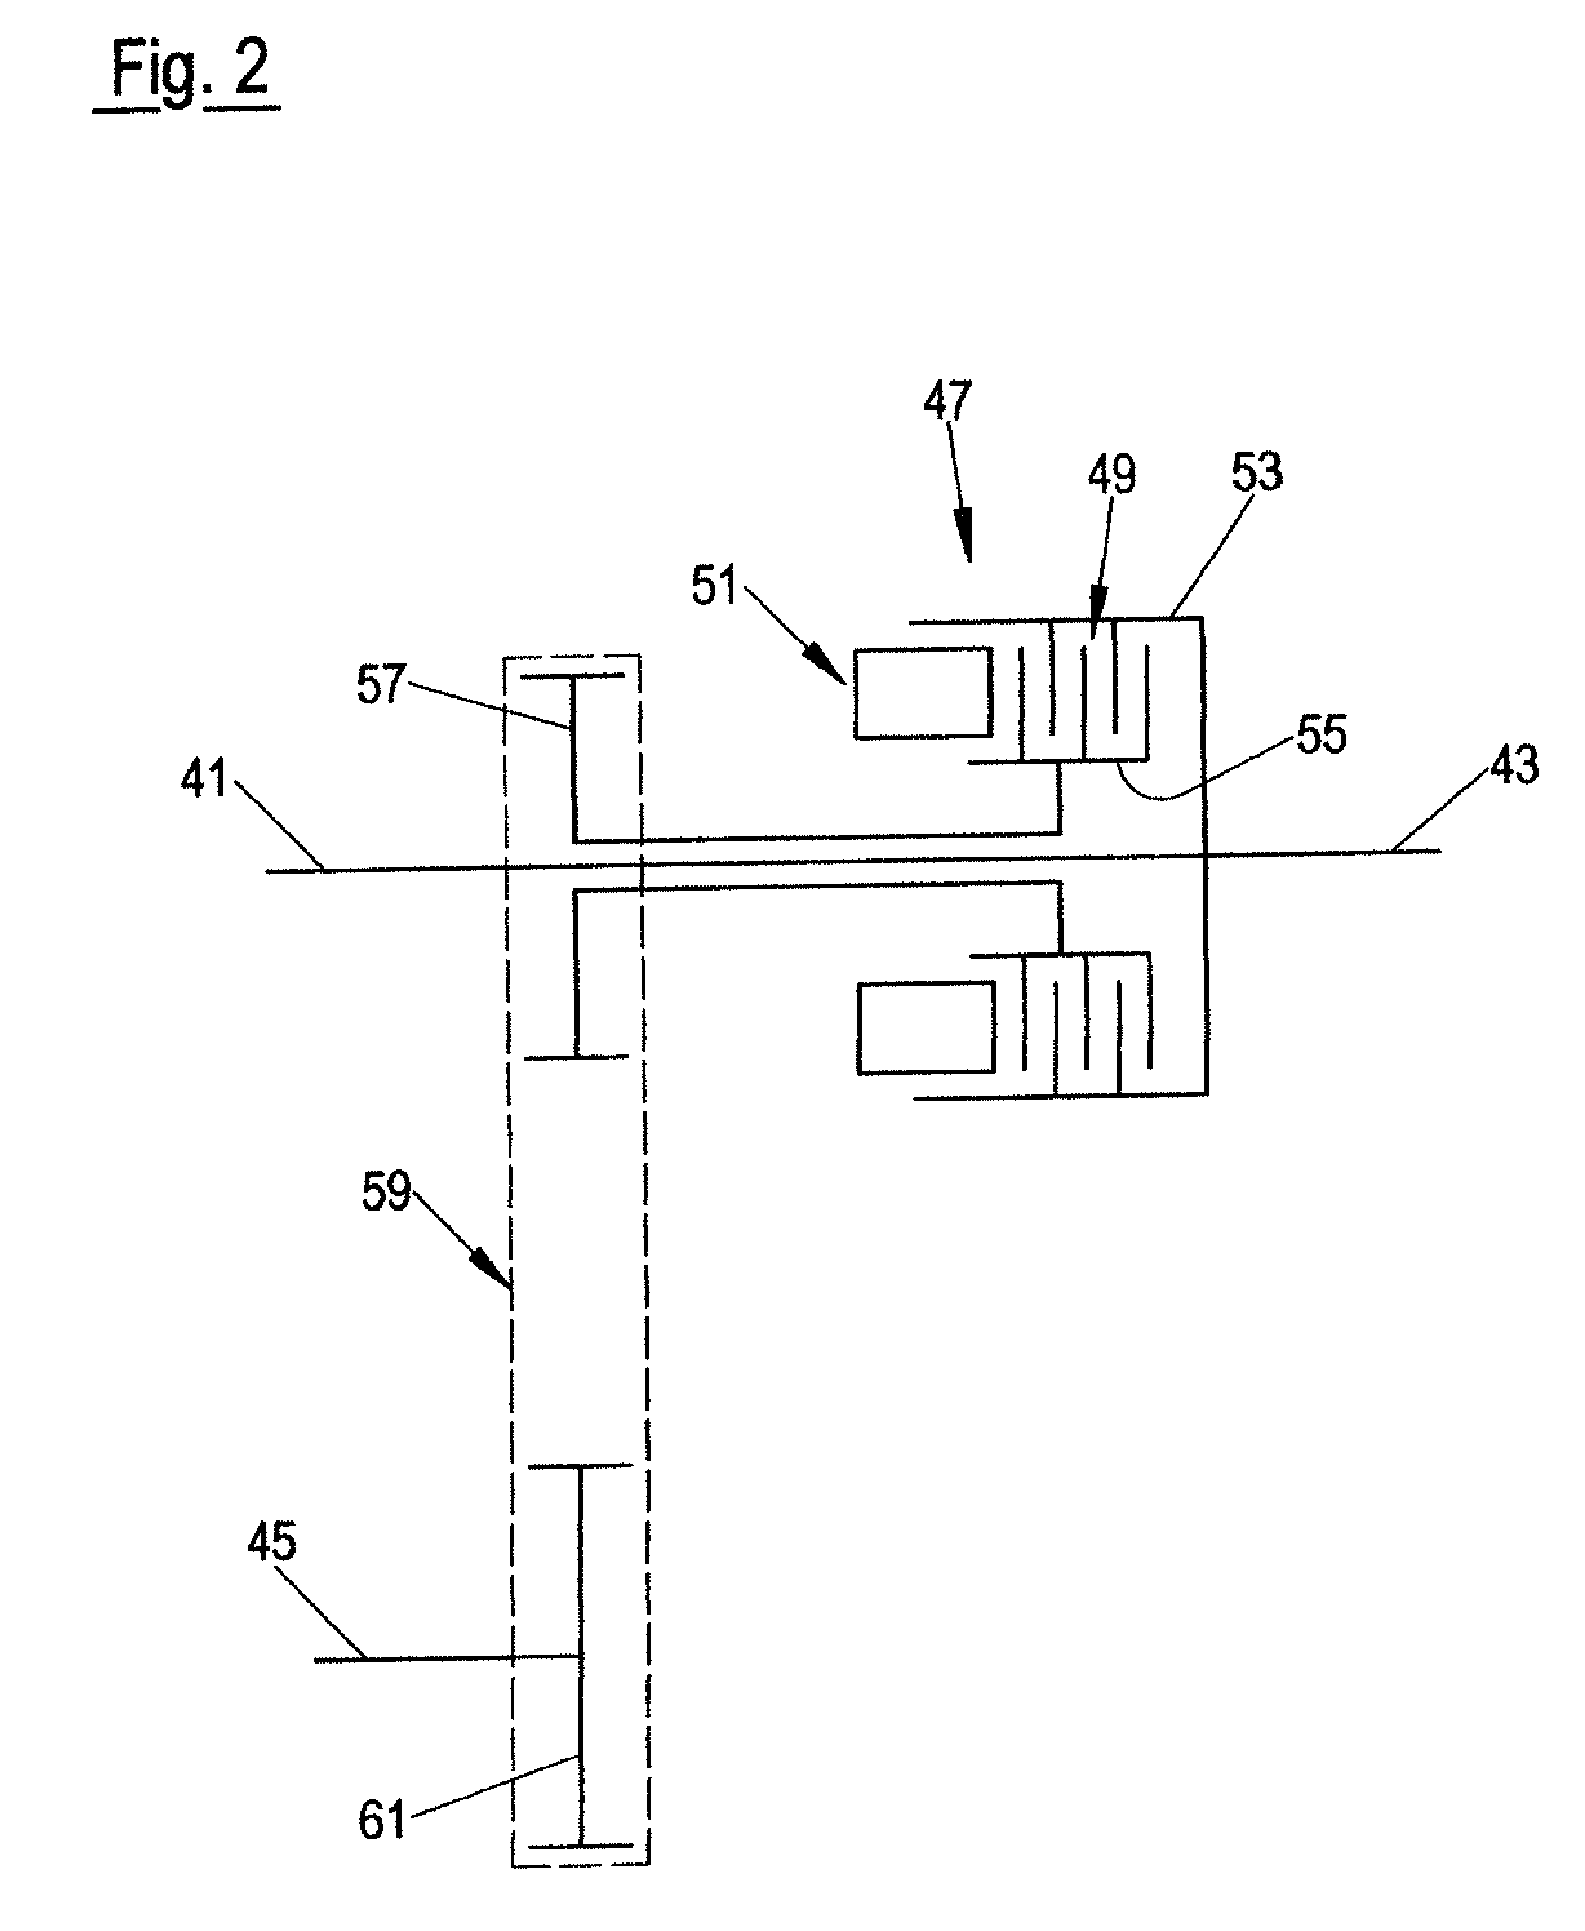 Method for classifying a clutch unit